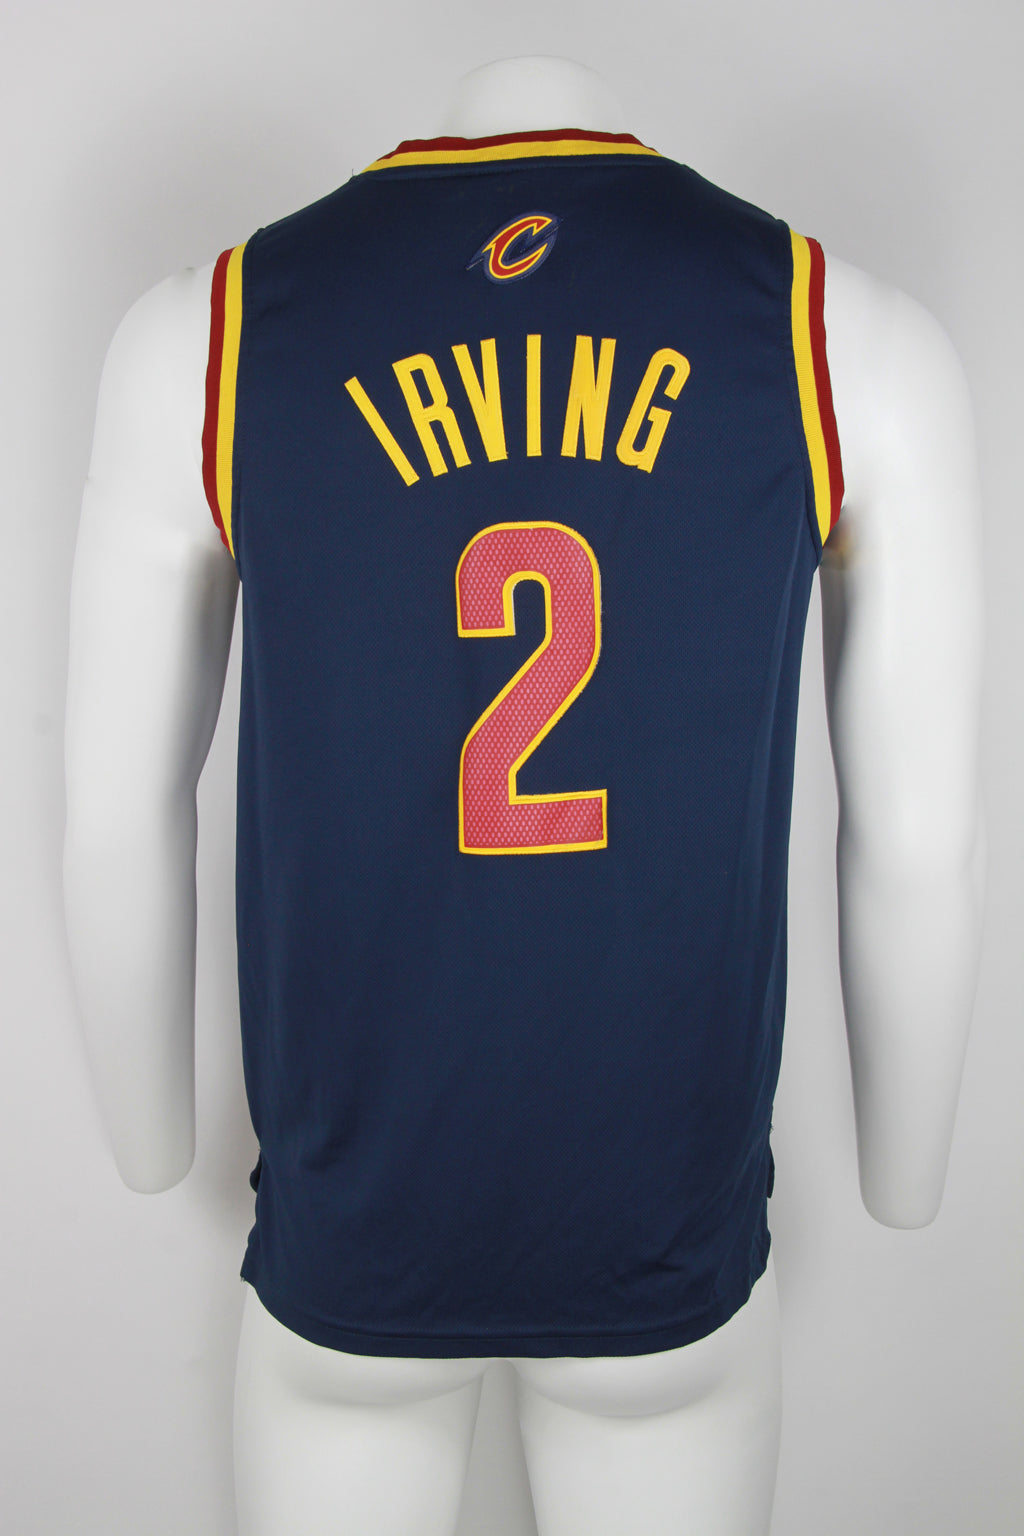 Men's Kyrie Irving #2 Cleveland Cavaliers 2016 Black Adidas Sleeved Jersey  XL